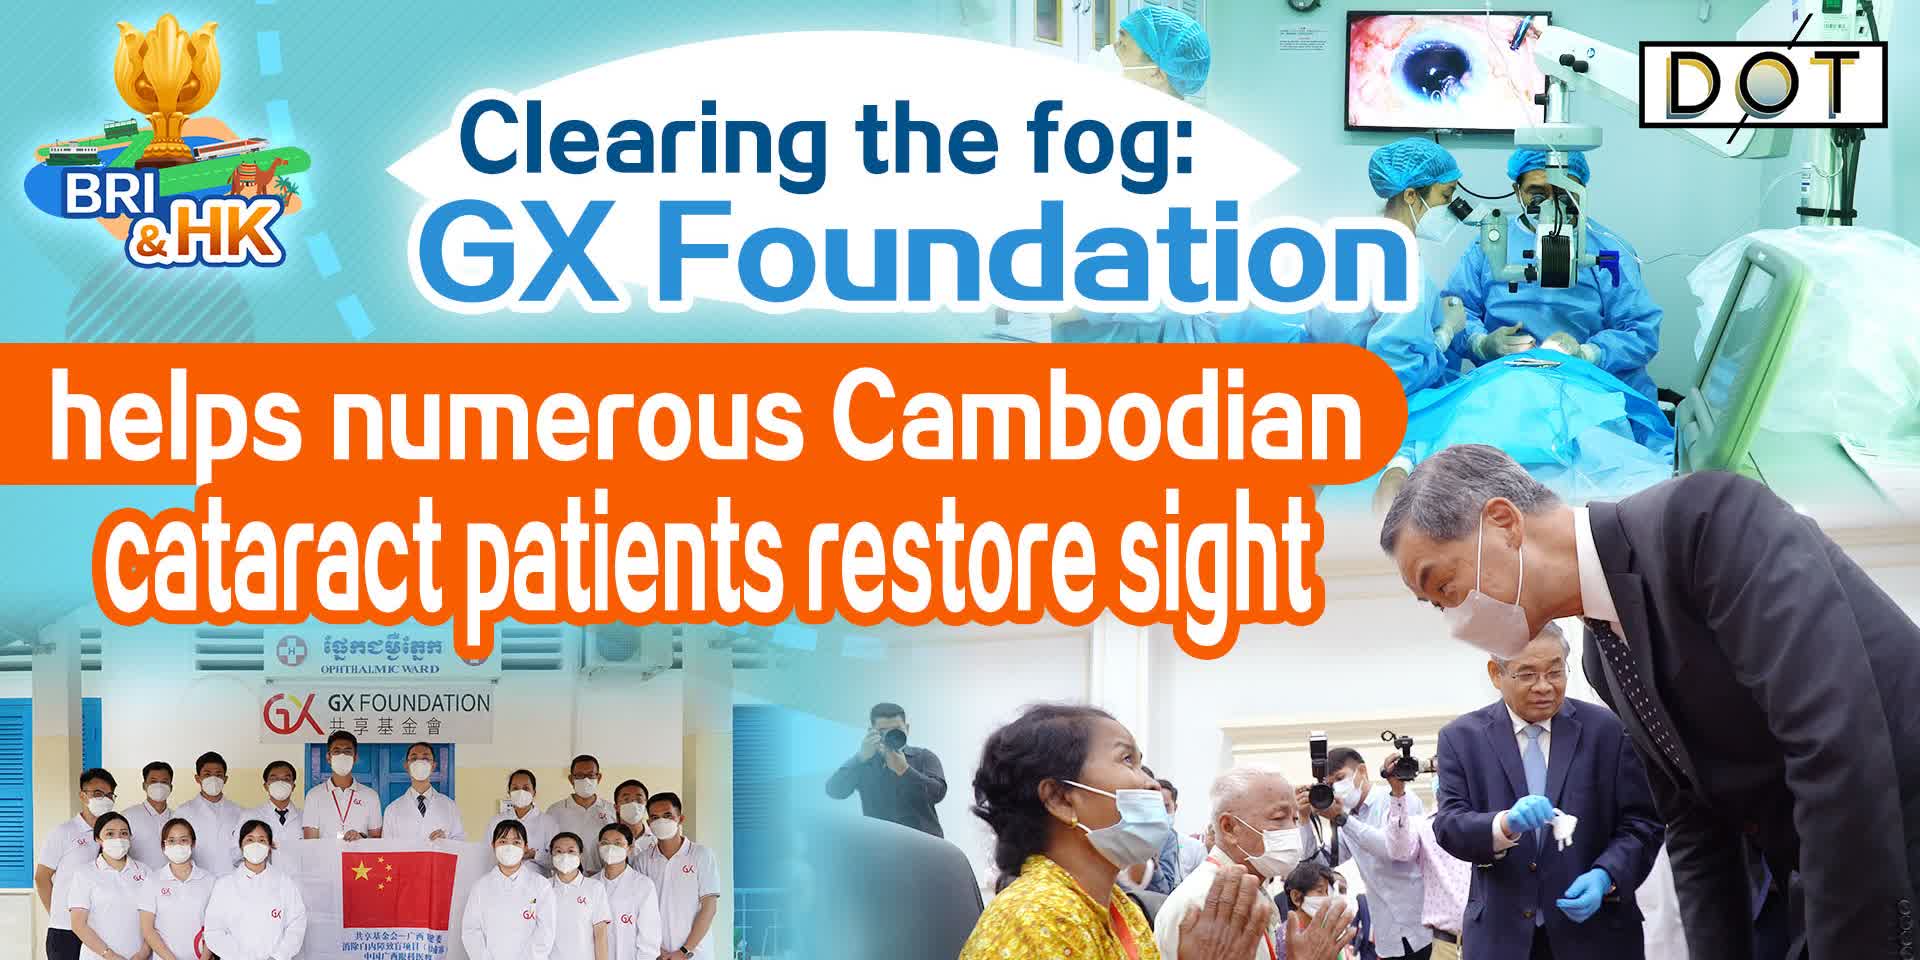 BRI & HK EP4 | Clearing the fog: GX Foundation helps numerous Cambodian cataract patients restore sight